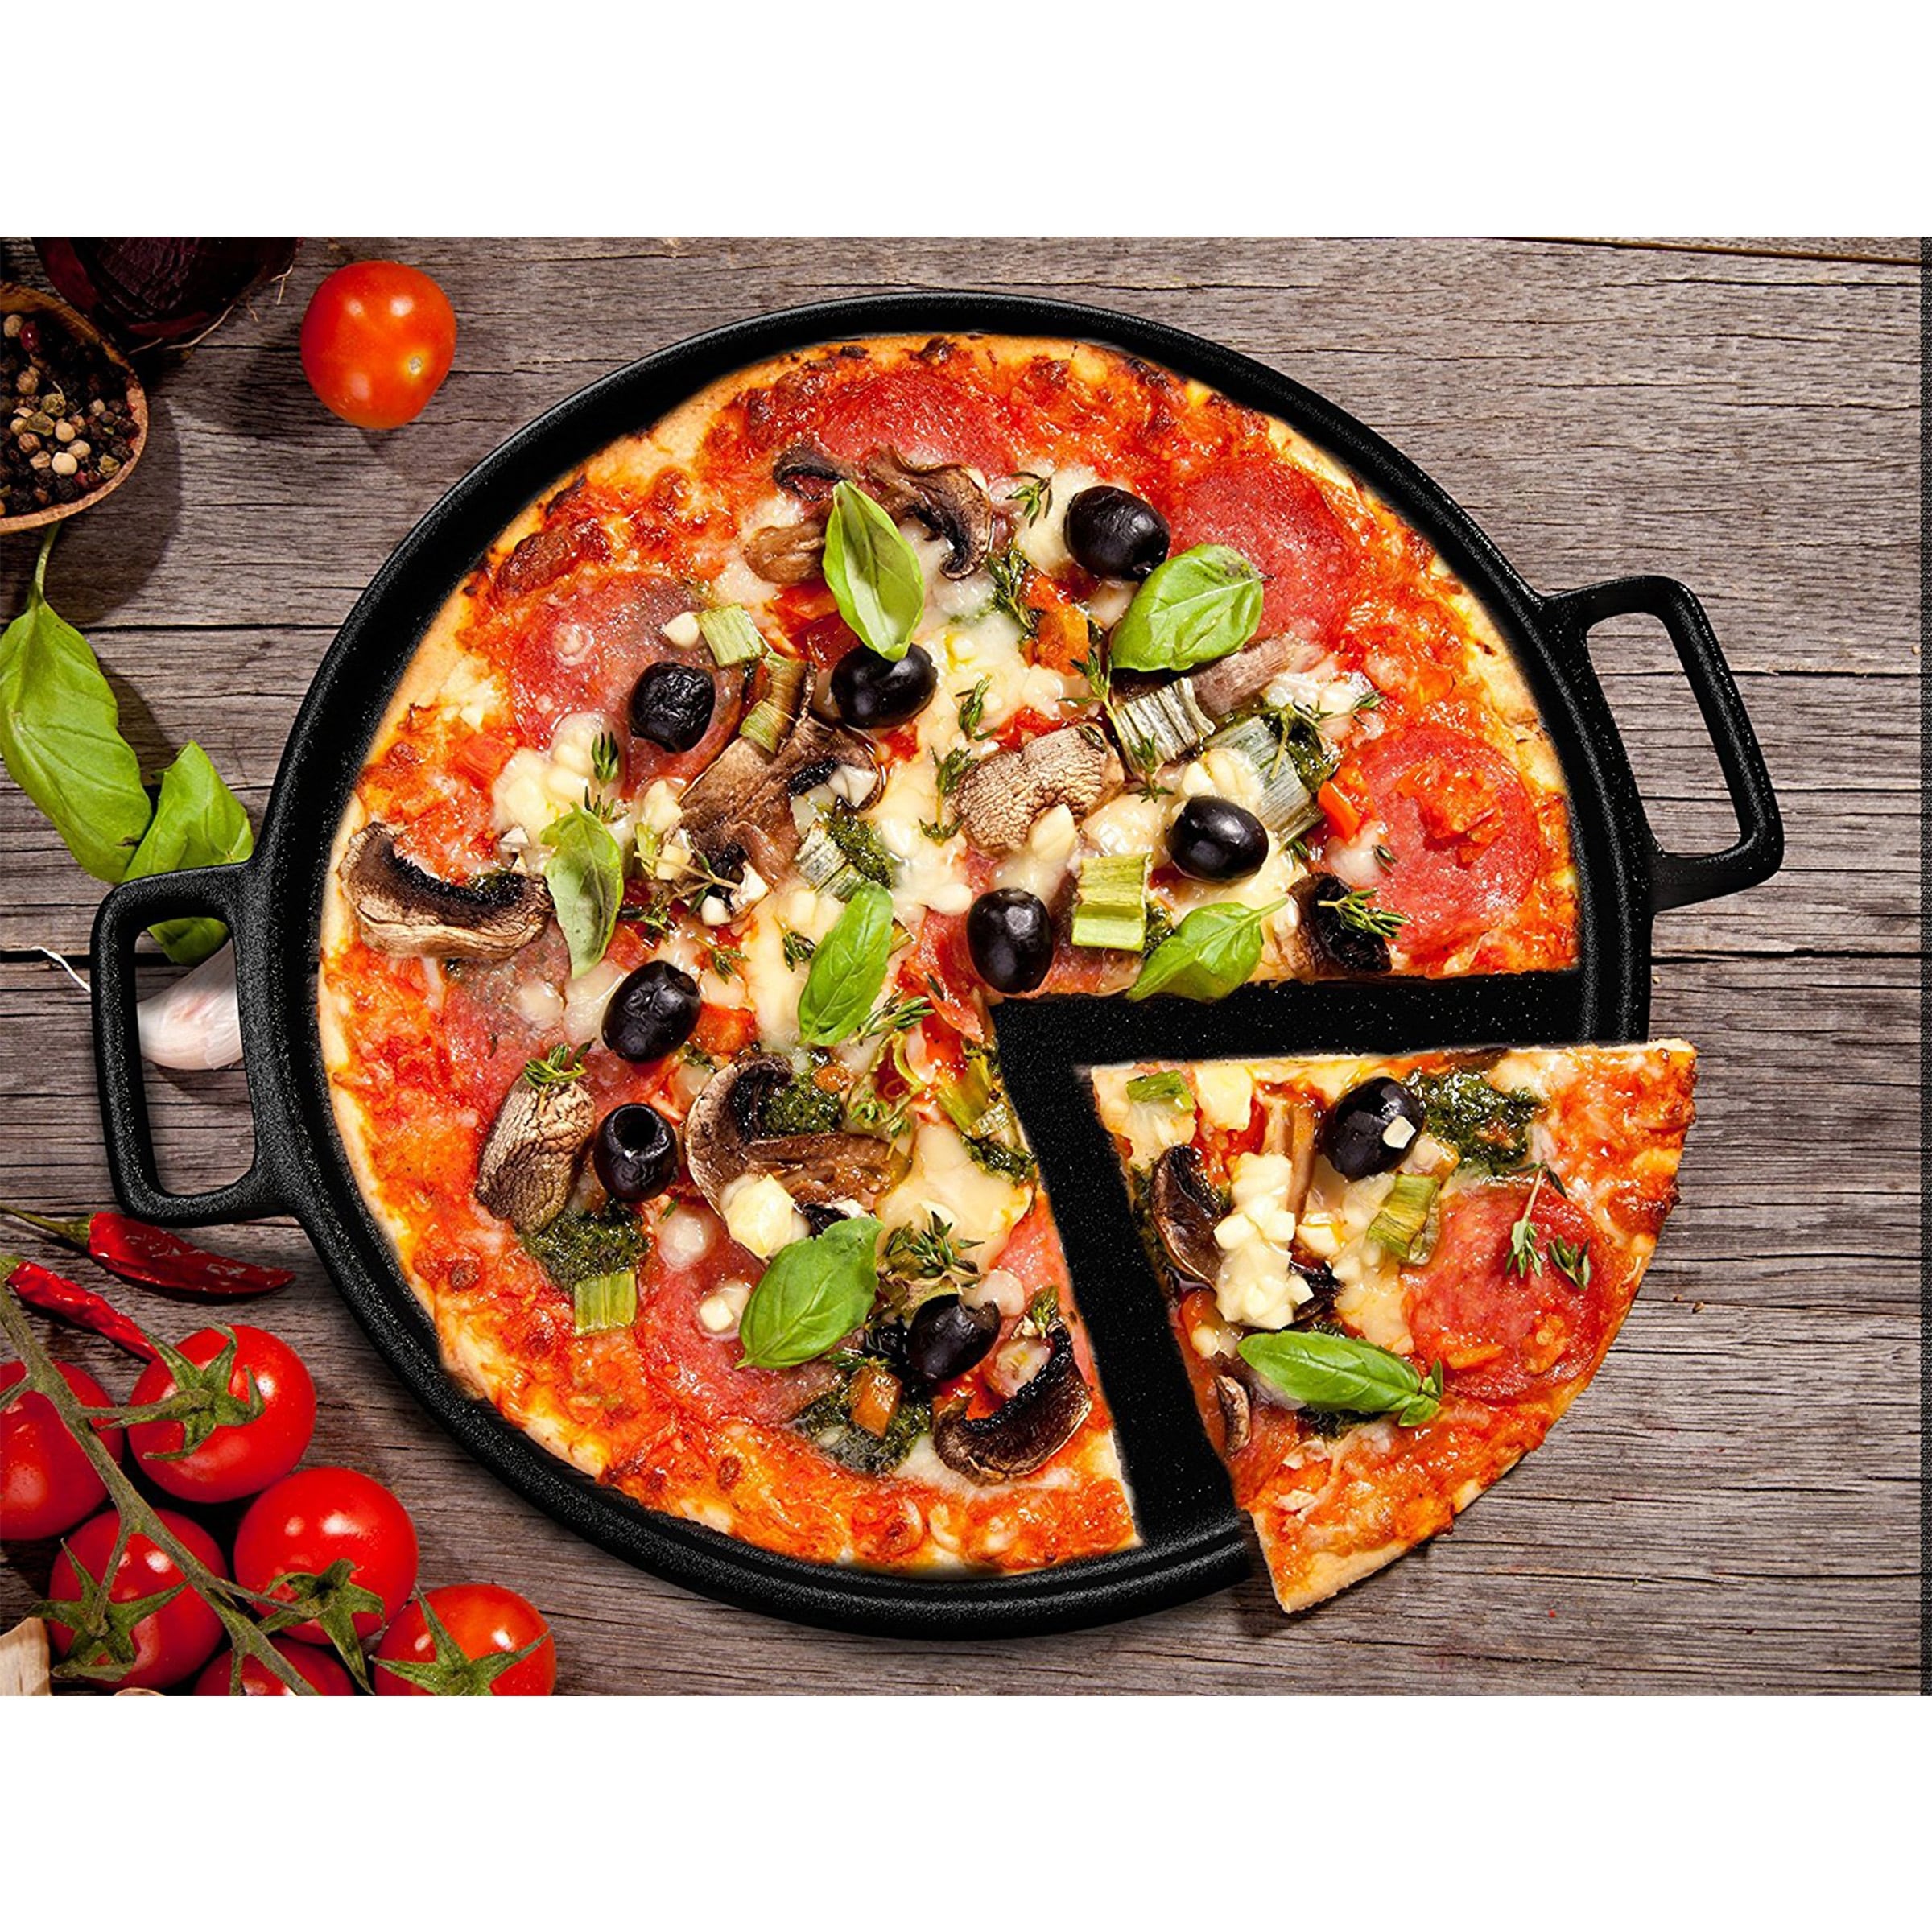 https://ak1.ostkcdn.com/images/products/is/images/direct/3a4a8971160ded608a80c88871a0f0be8622ab41/Cast-Iron-Pizza-Pan-14-Inches-Skillet-for-Cooking%2C-Baking%2C-Grilling-Durable-by-Home-Complete.jpg